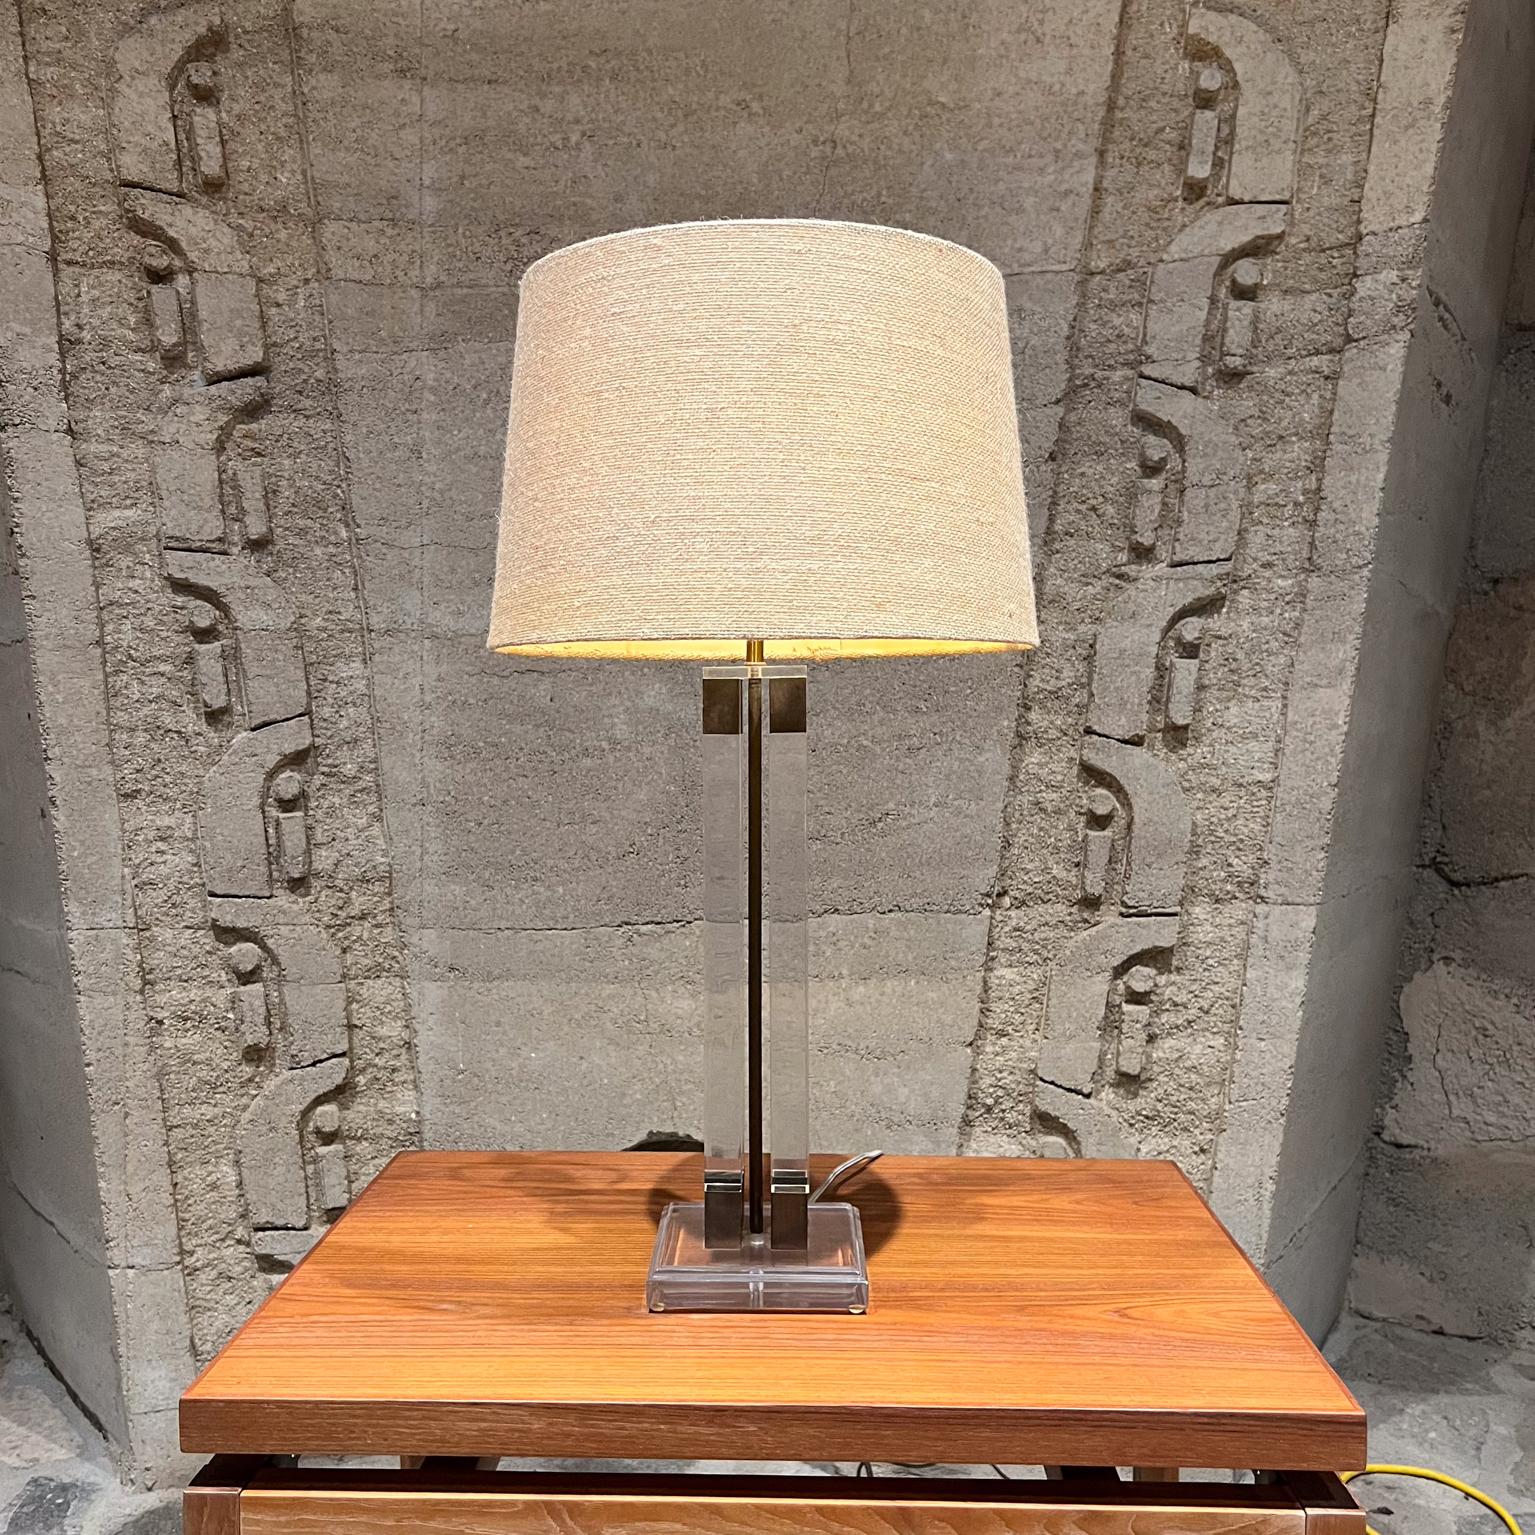 
1970s Modern Lucite Brass Table Lamp
Style of Charles Hollis Jones- Modern Hollywood Regency era.
Stunning form
Unmarked.
21.5 tall to socket x 6 d x 6 w
Preowned Original vintage unrestored condition. Shade is not included.
See images provided